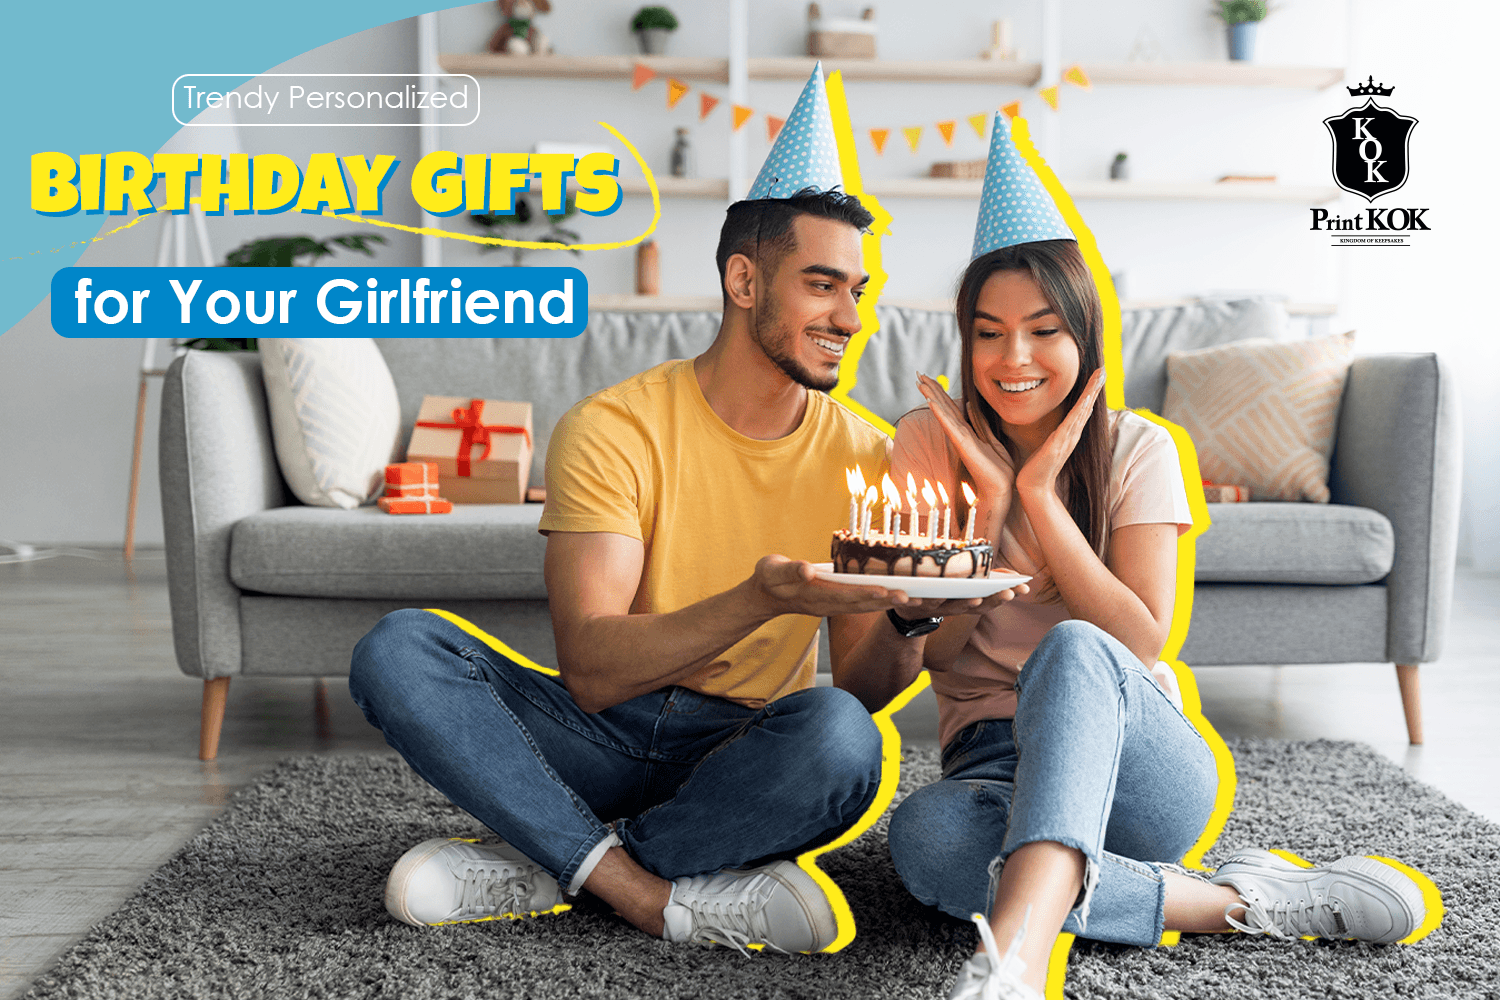 Trendy Personalized Birthday Gifts for Your Girlfriend